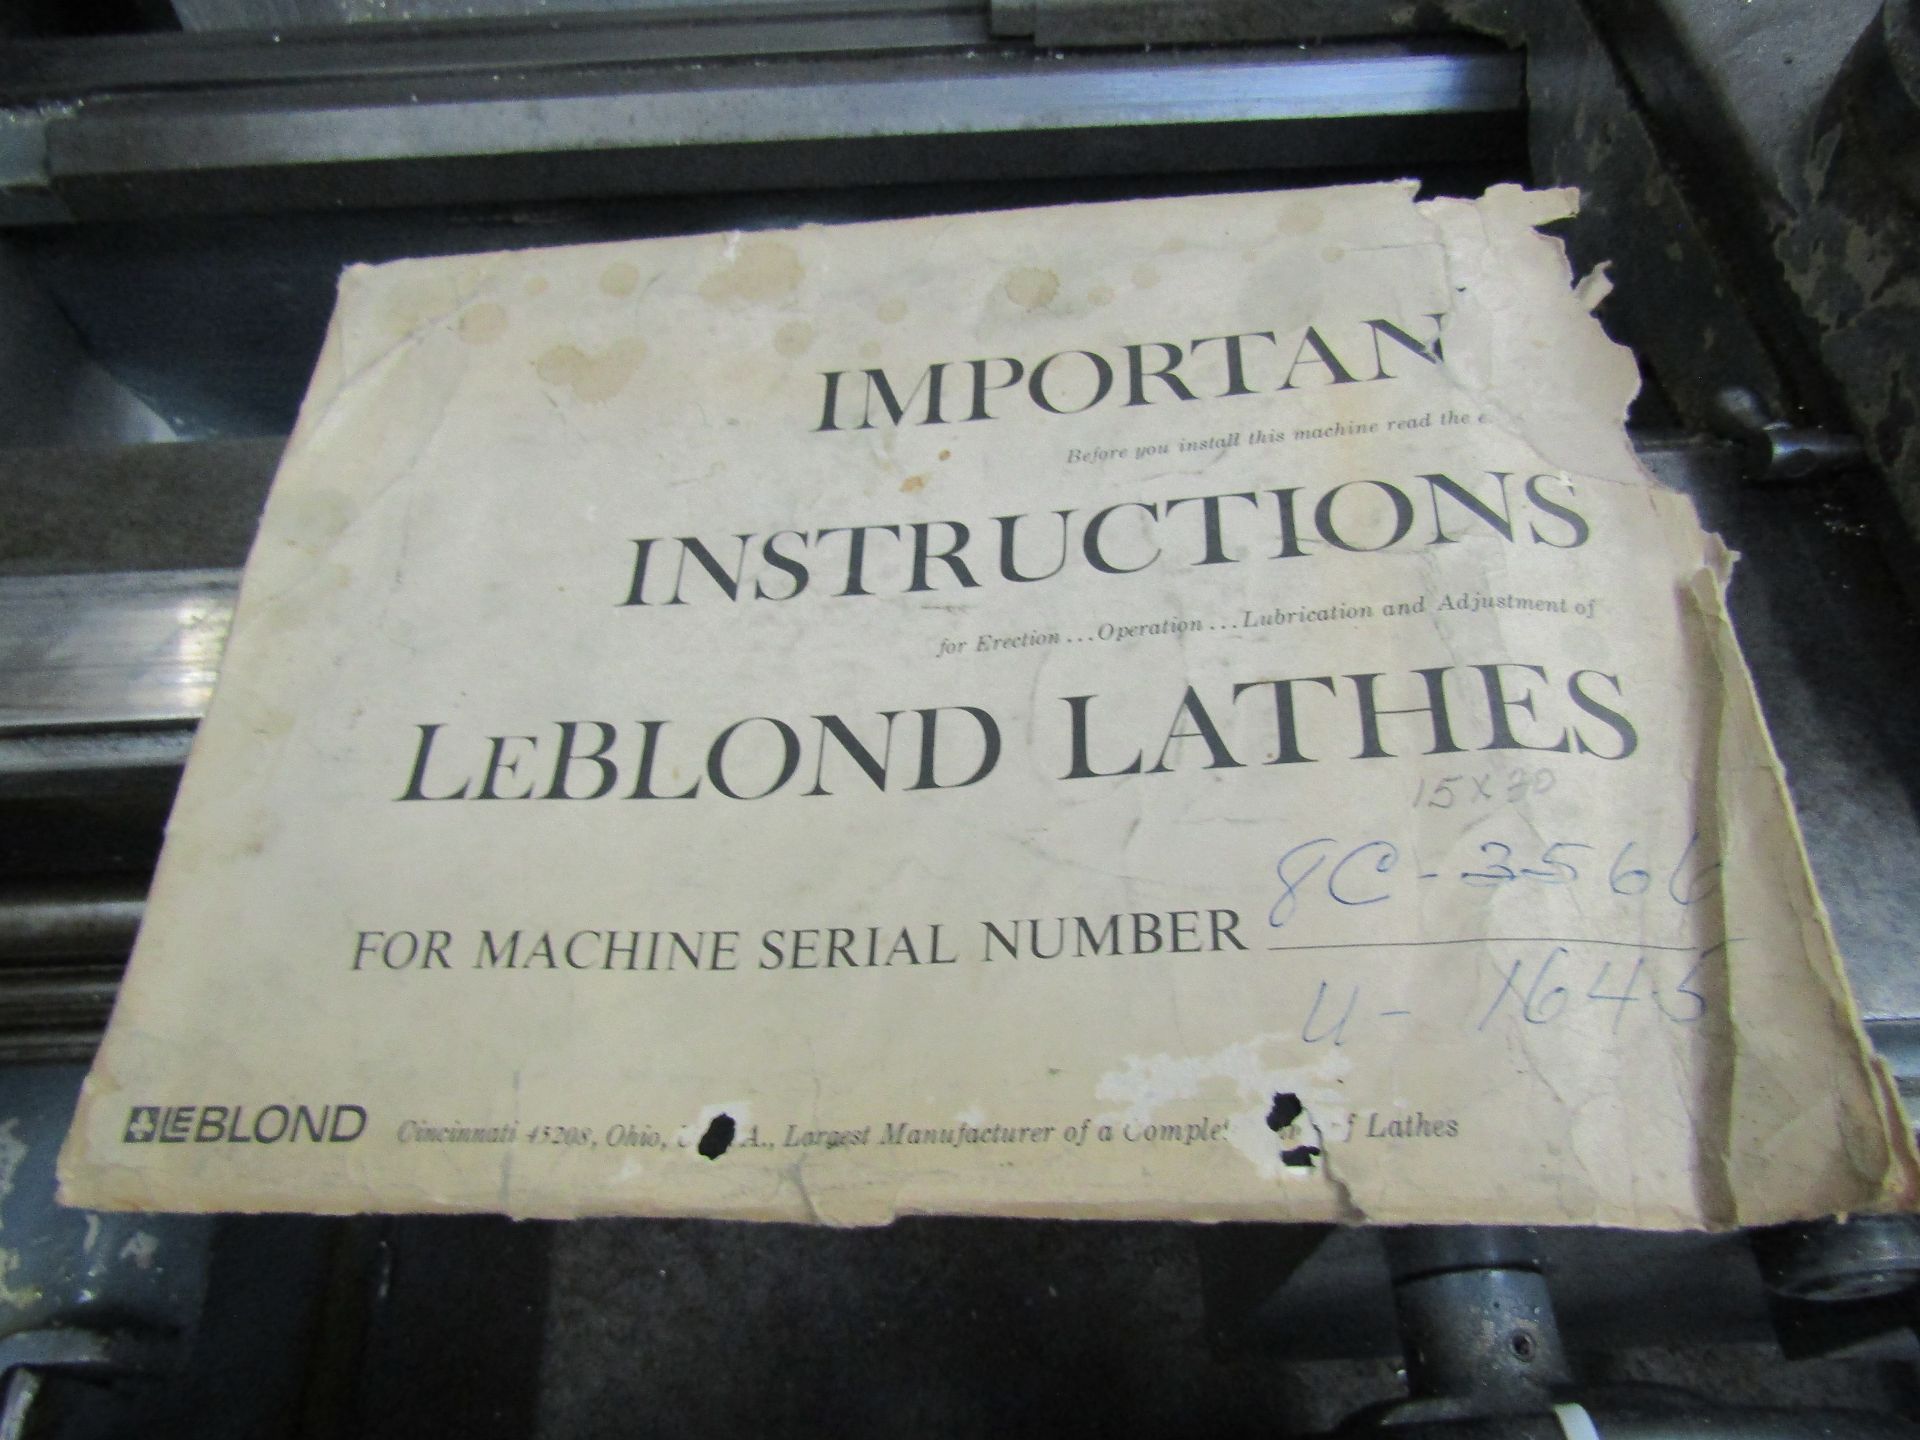 1971 LEBLOND REGAL ENGINE LATHE, 15" SWING, SERIAL 8C-3566. WITH ASSORTED TOOL HOLDERS AND - Image 10 of 11